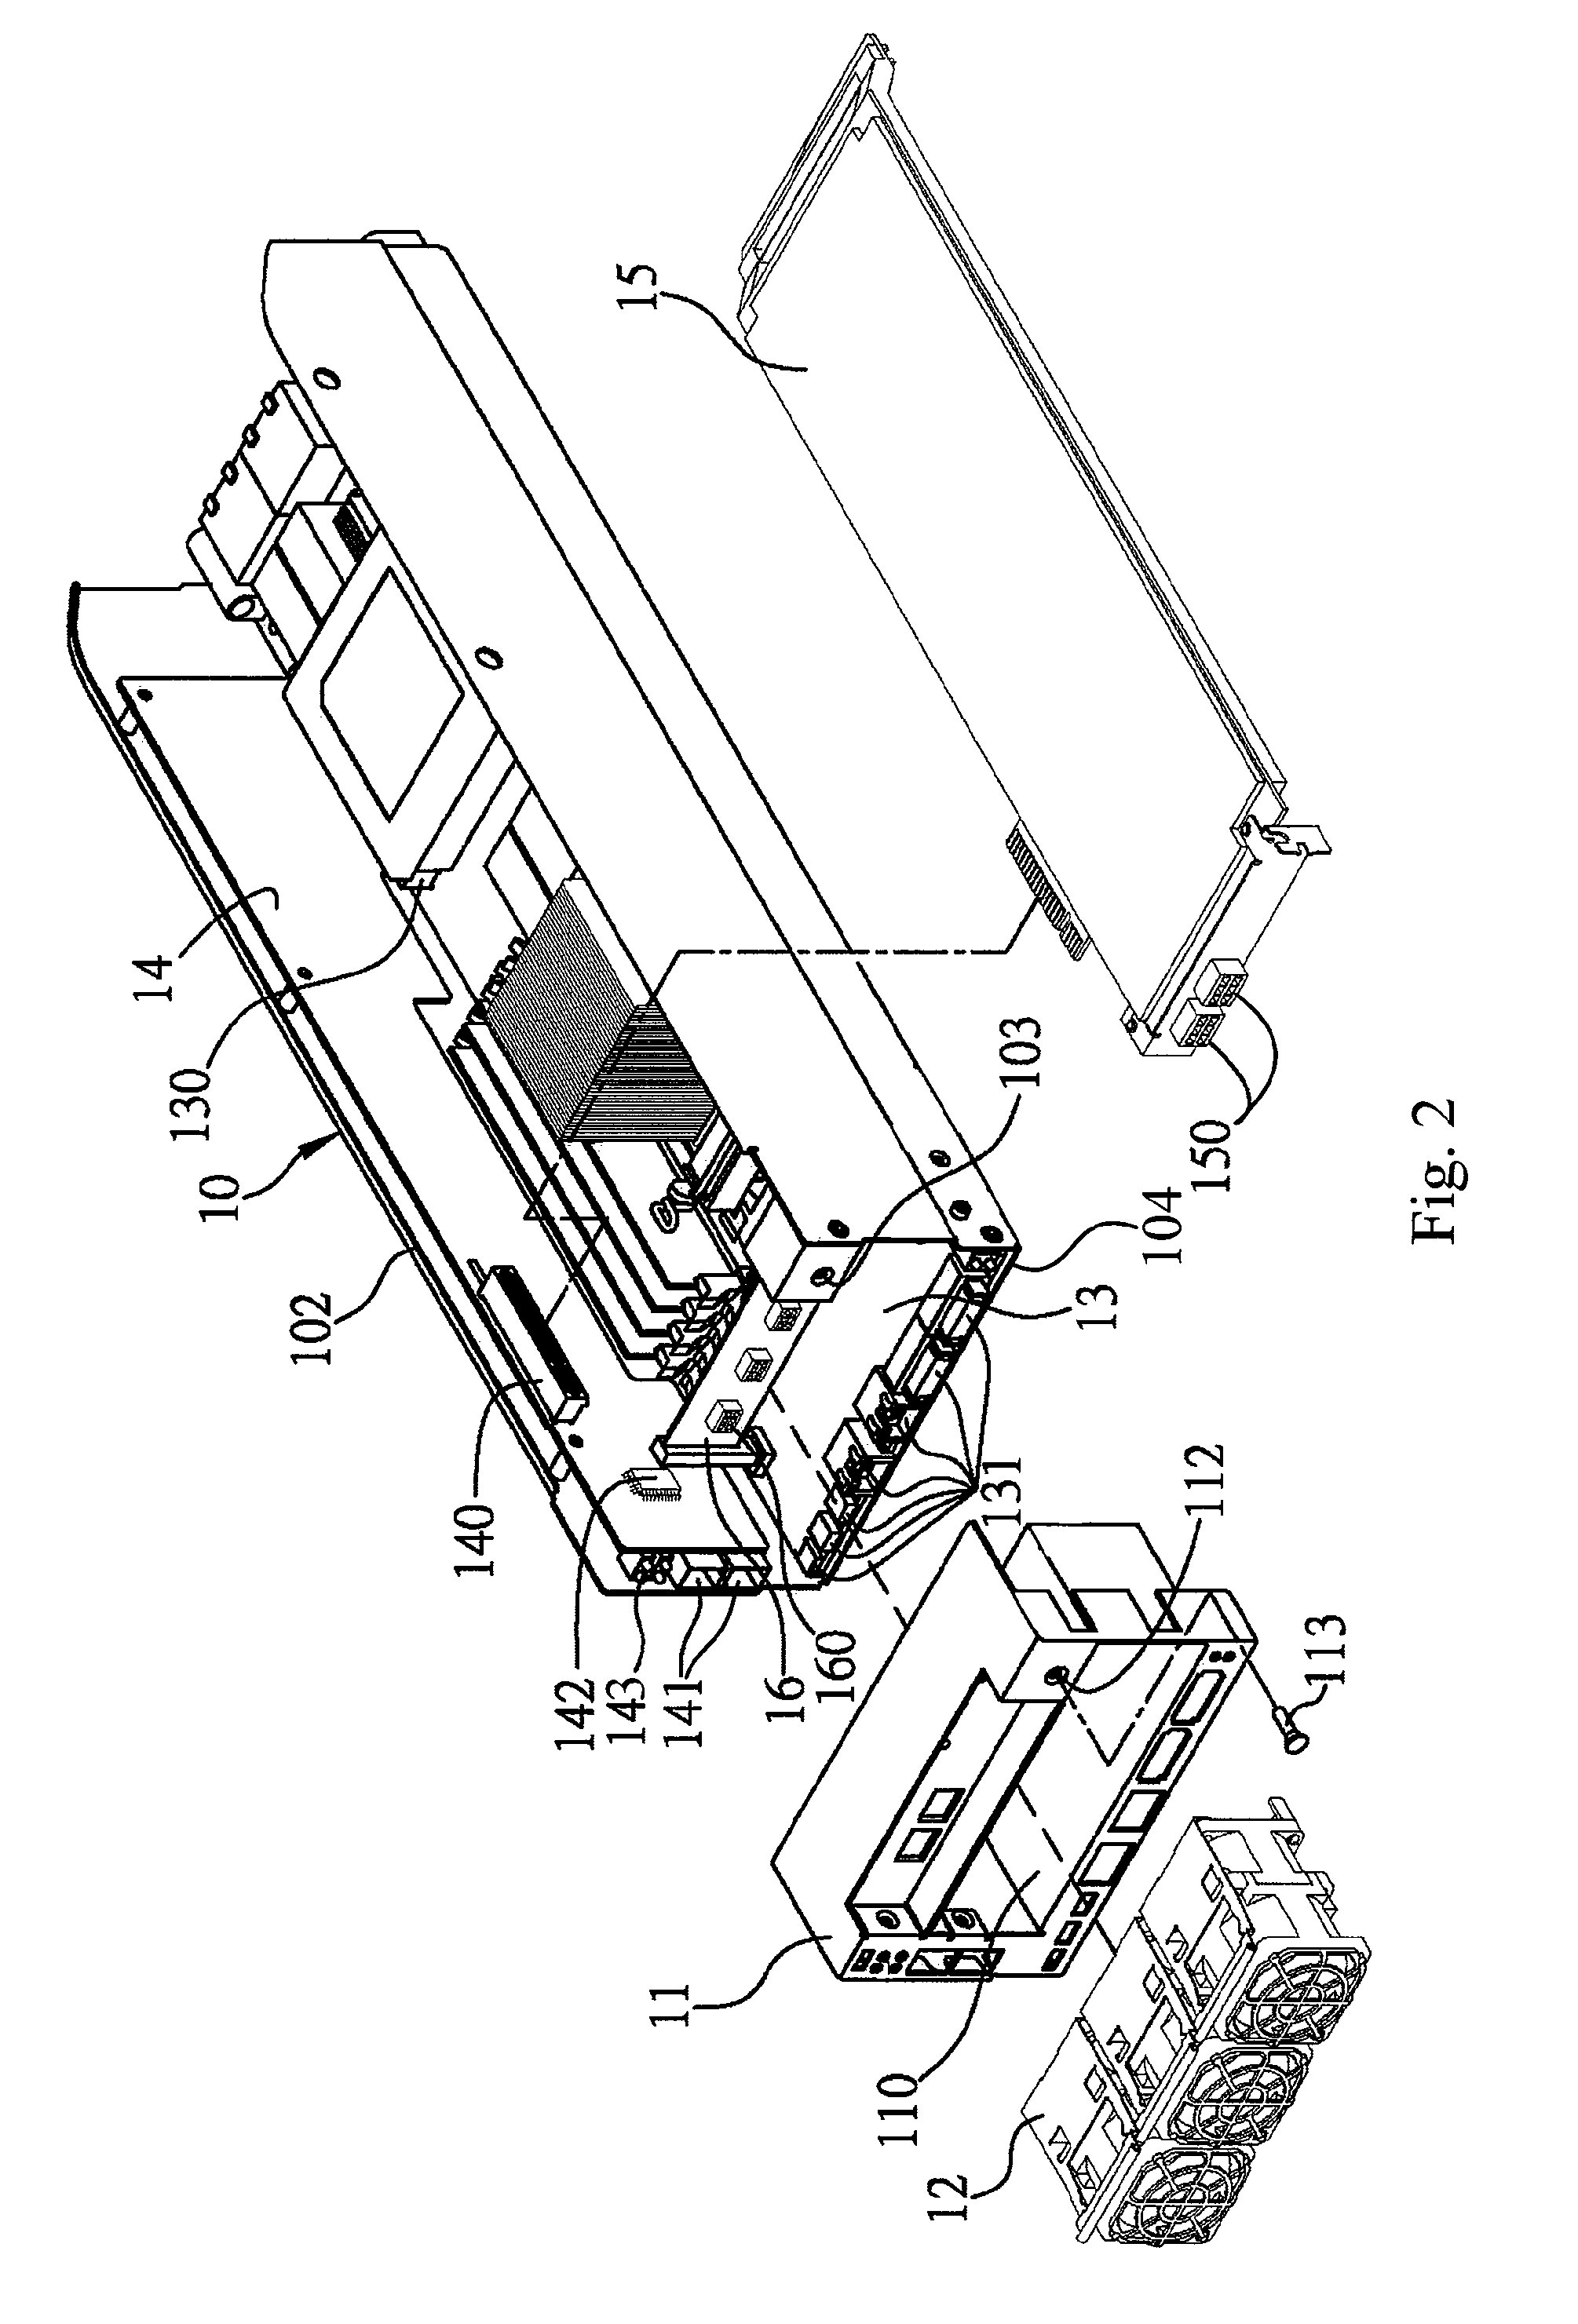 Physical configuration of computer system